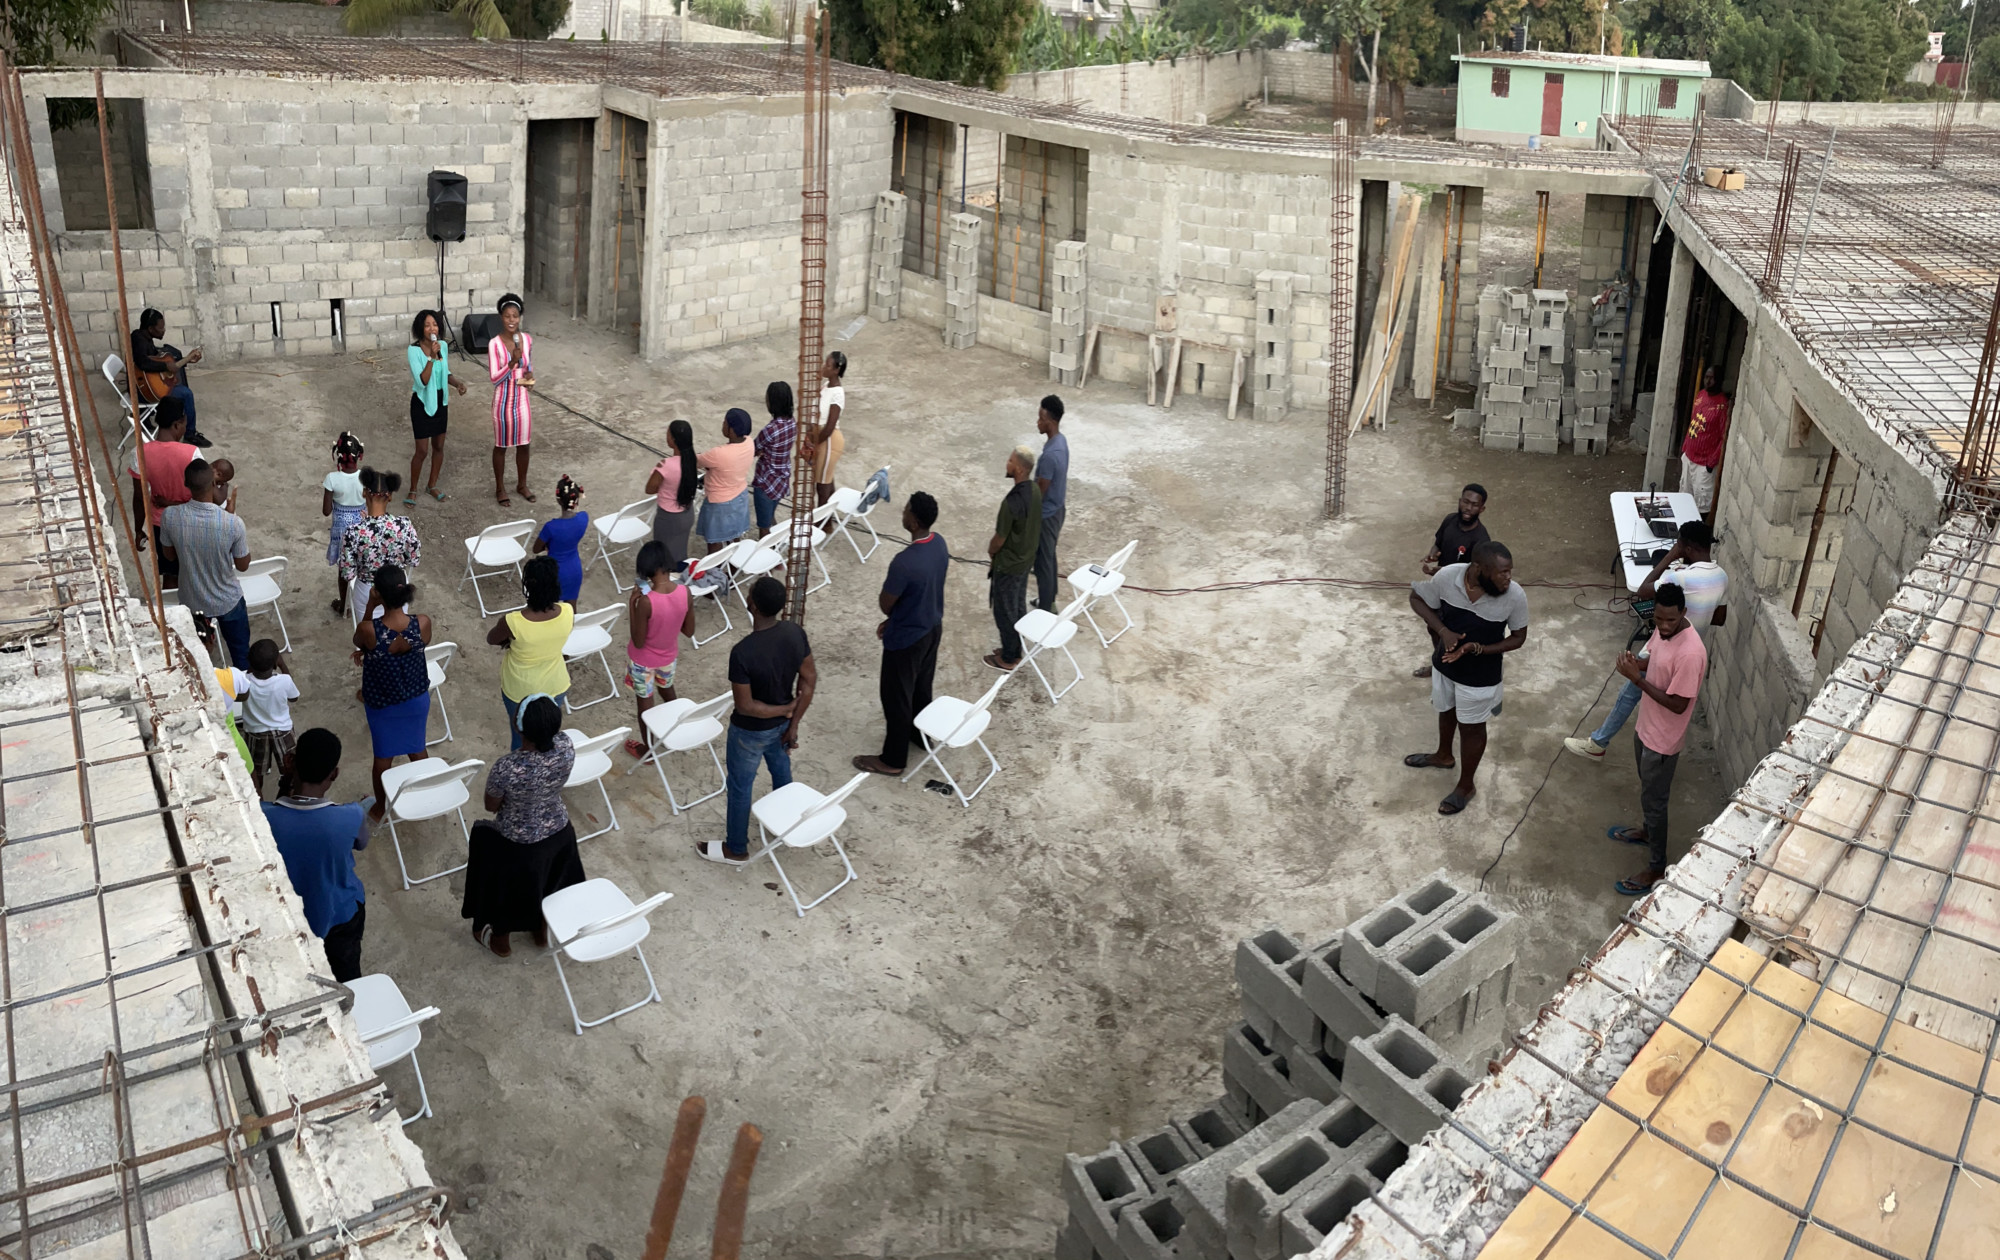 First Service in Haiti and Weekly Prayer for the Oxford Neighborhood